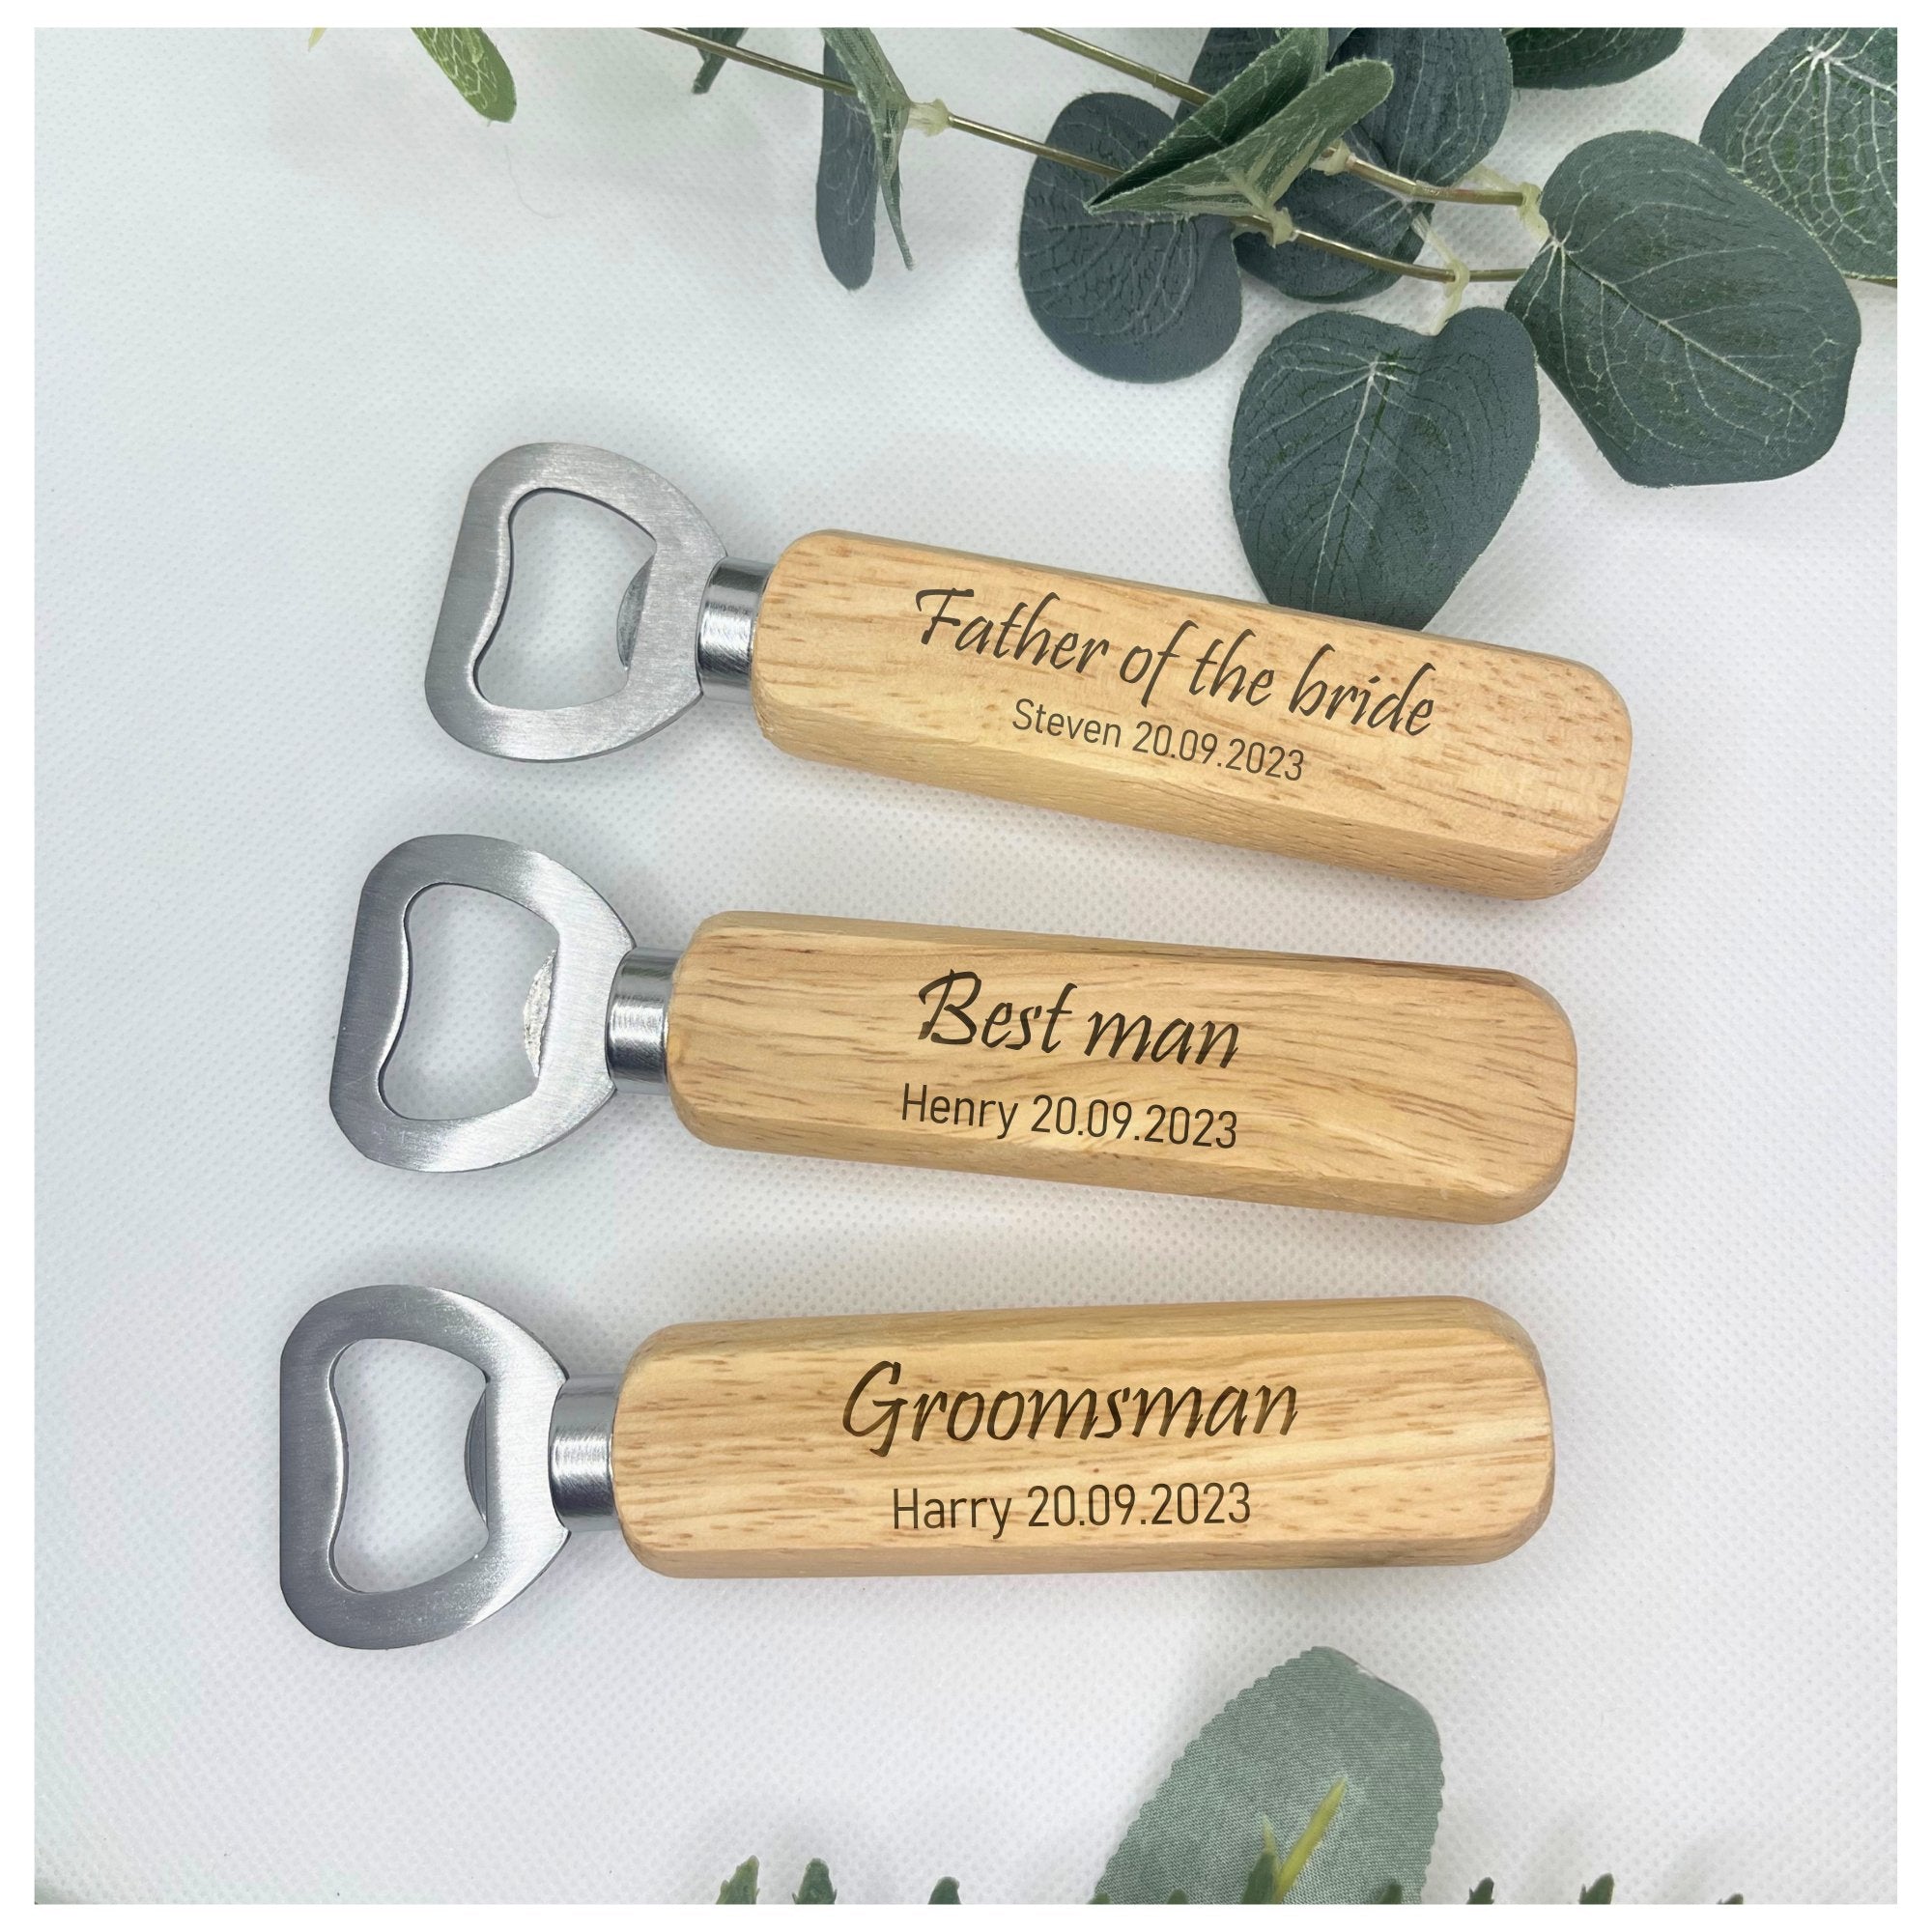 A thoughtful wedding gift - a custom engraved bottle opener with the couple's details.